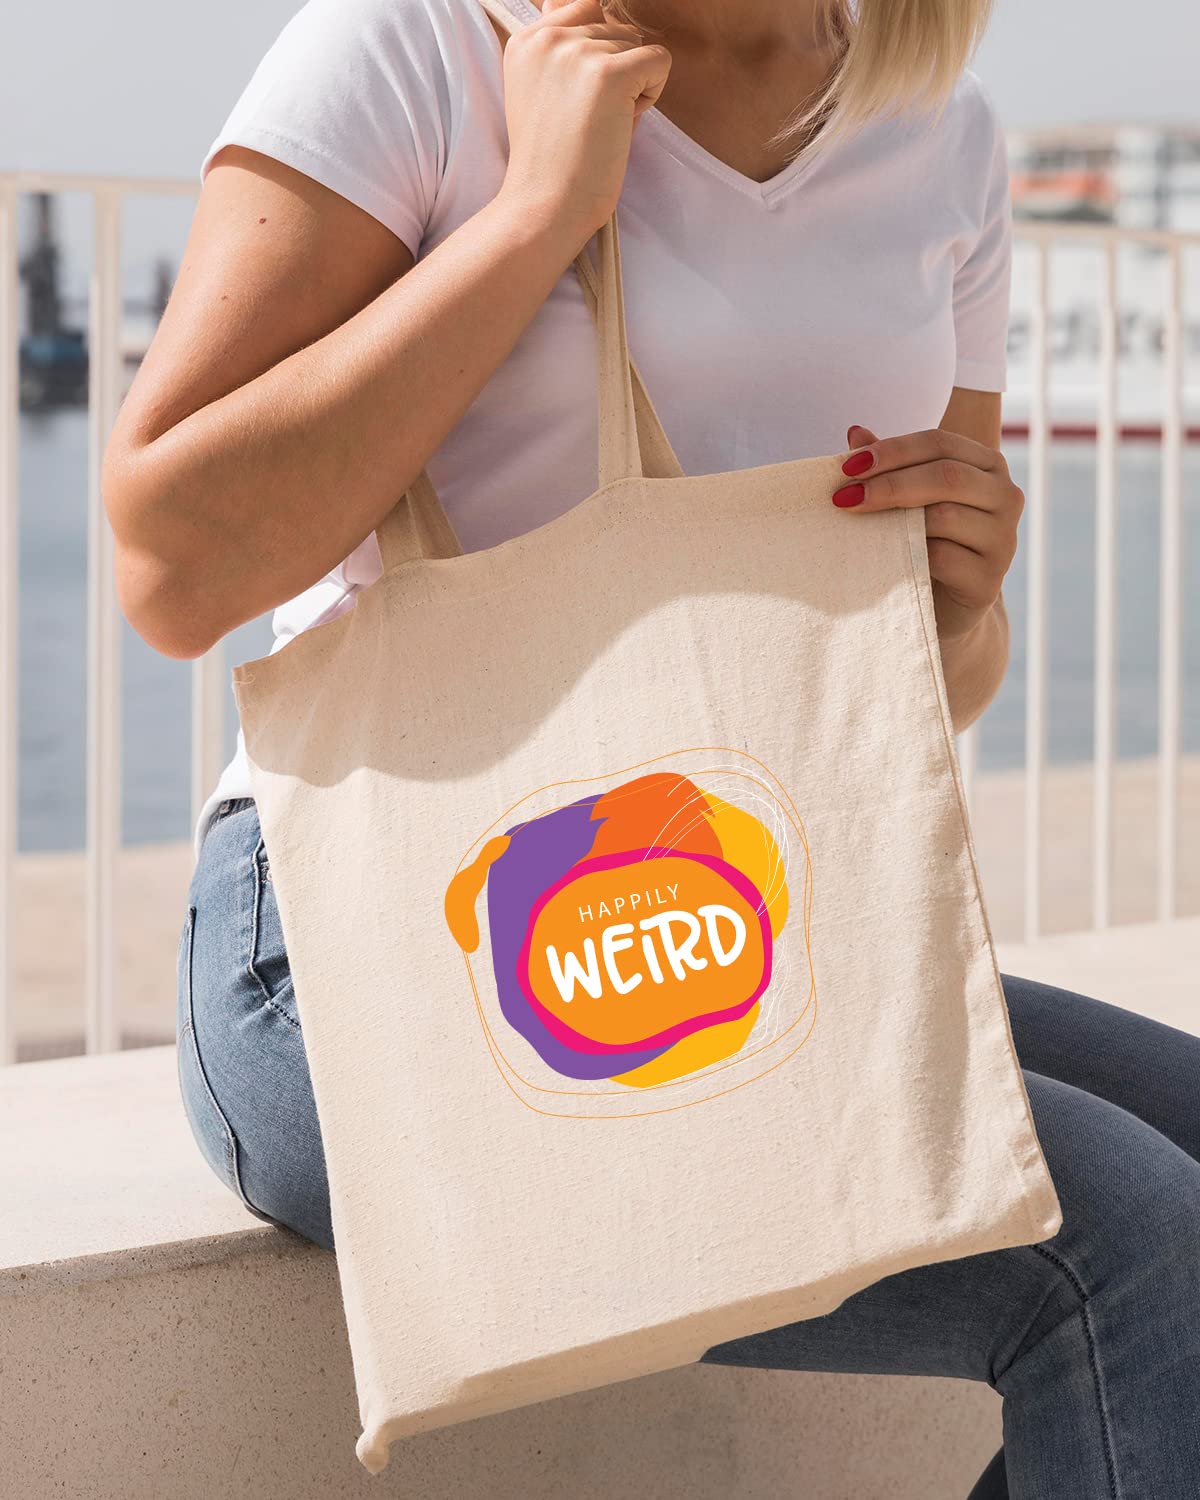 The Pink Magnet Happily Weird Tote Bag - Canvas Tote Bag for Women | Printed Multipurpose Cotton Bags | Cute Hand Bag for Girls | Best for College, Travel, Grocery | Reusable Shopping Bag | Eco-Friendly Tote Bag